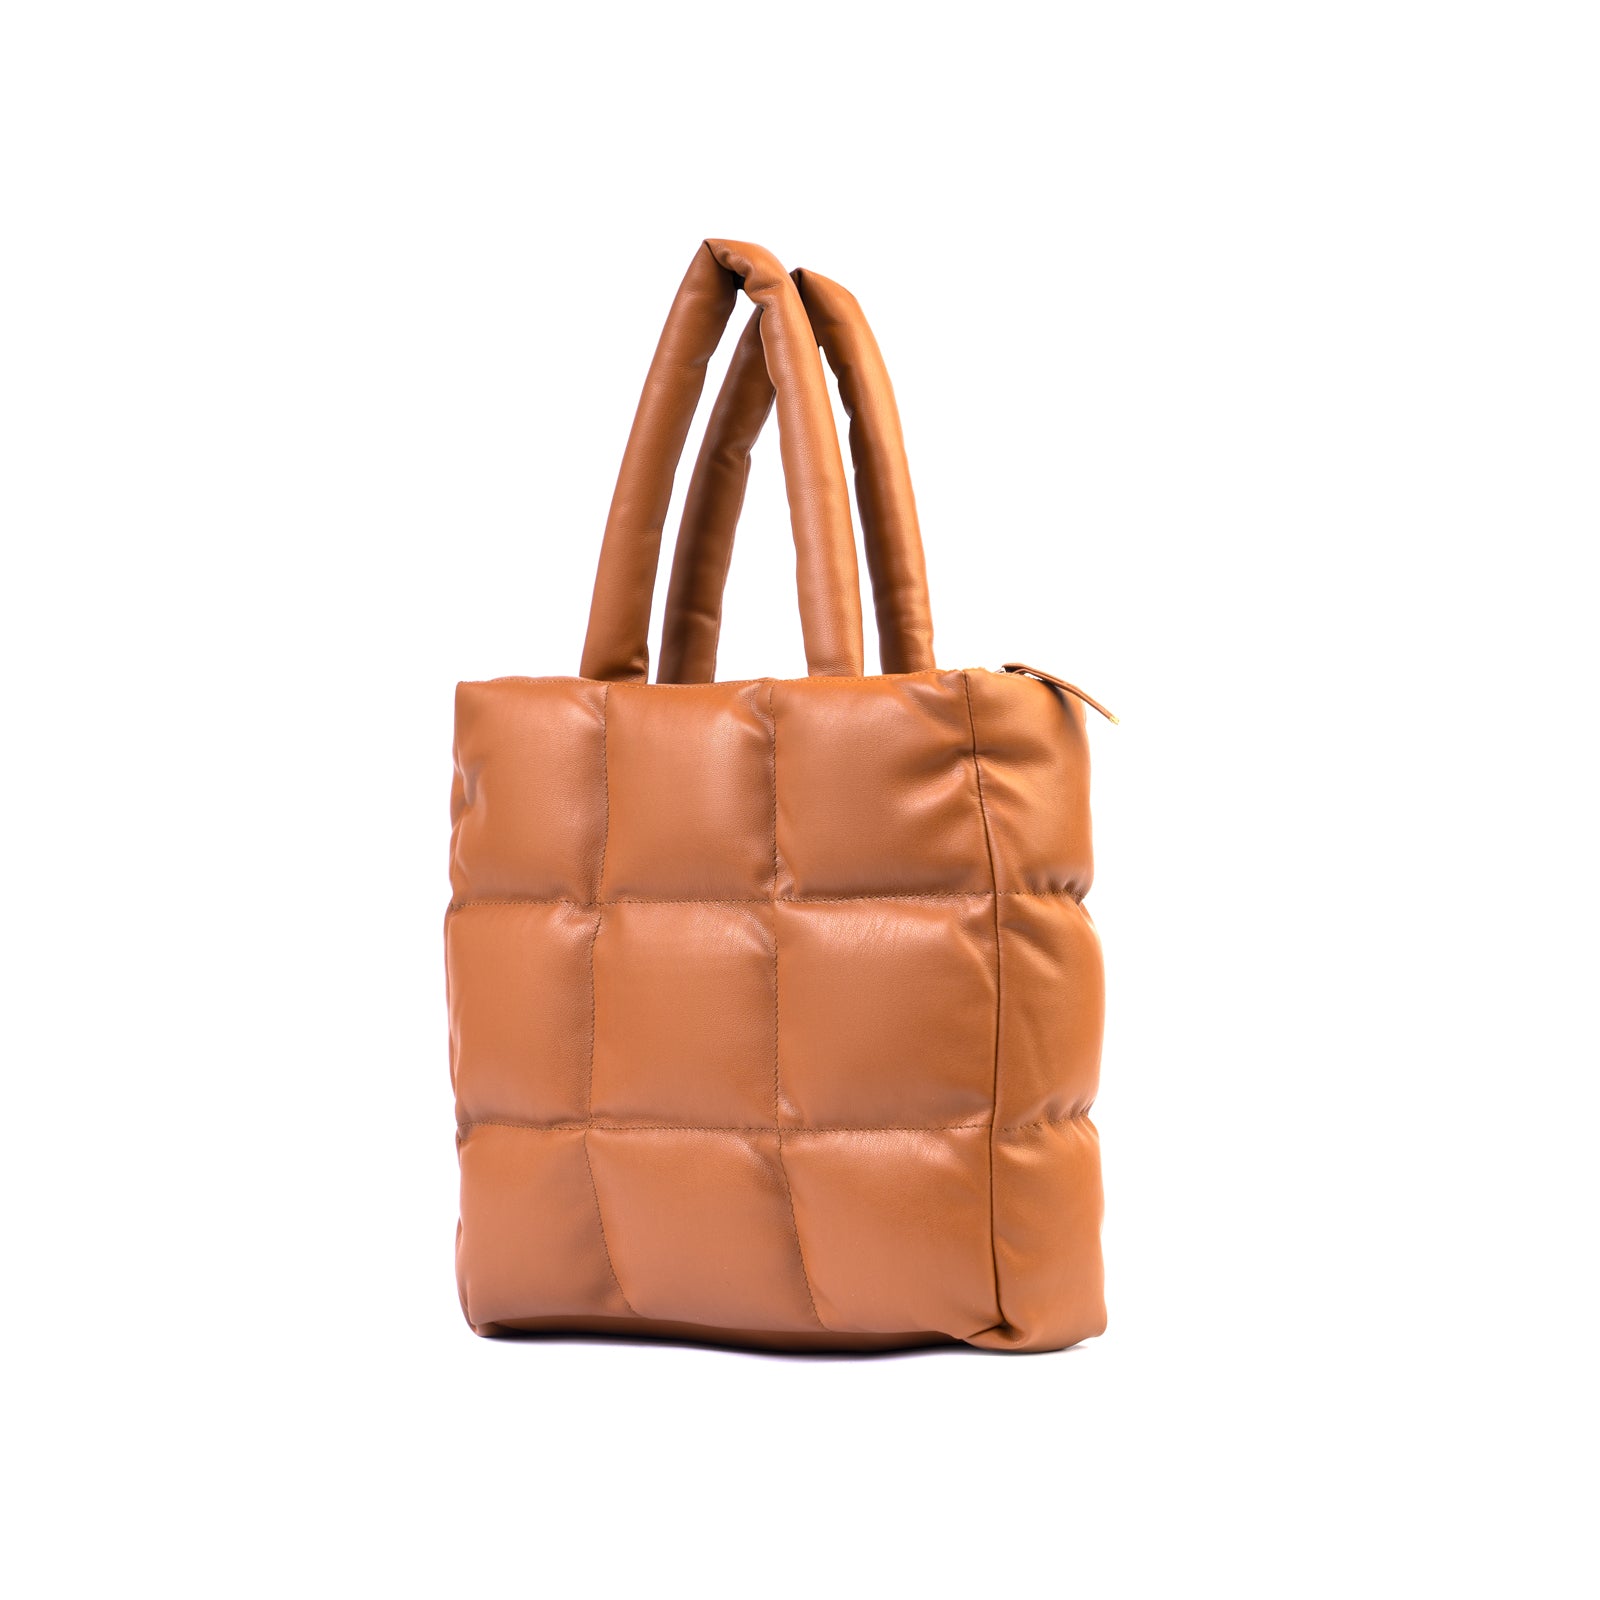 TAN QUILTED SQUARE TOTE BAG